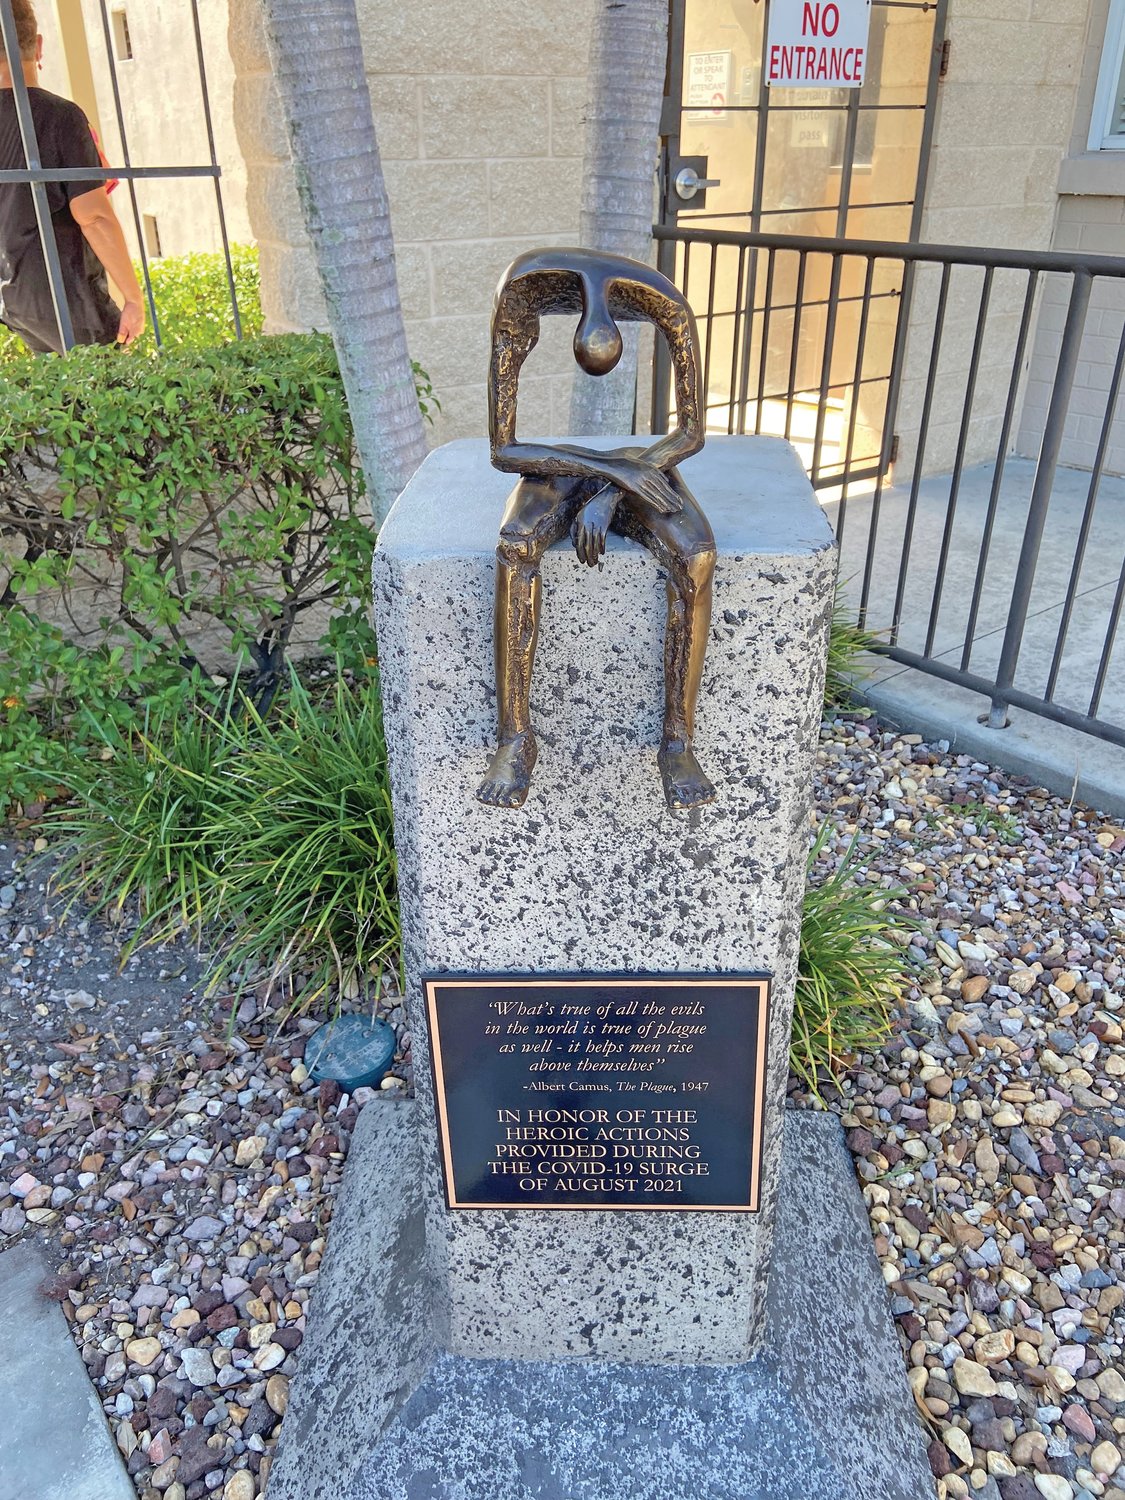 This is a photo of the COVID-19 memorial statue located outside the entrance of Hendry Regional Medical Center.